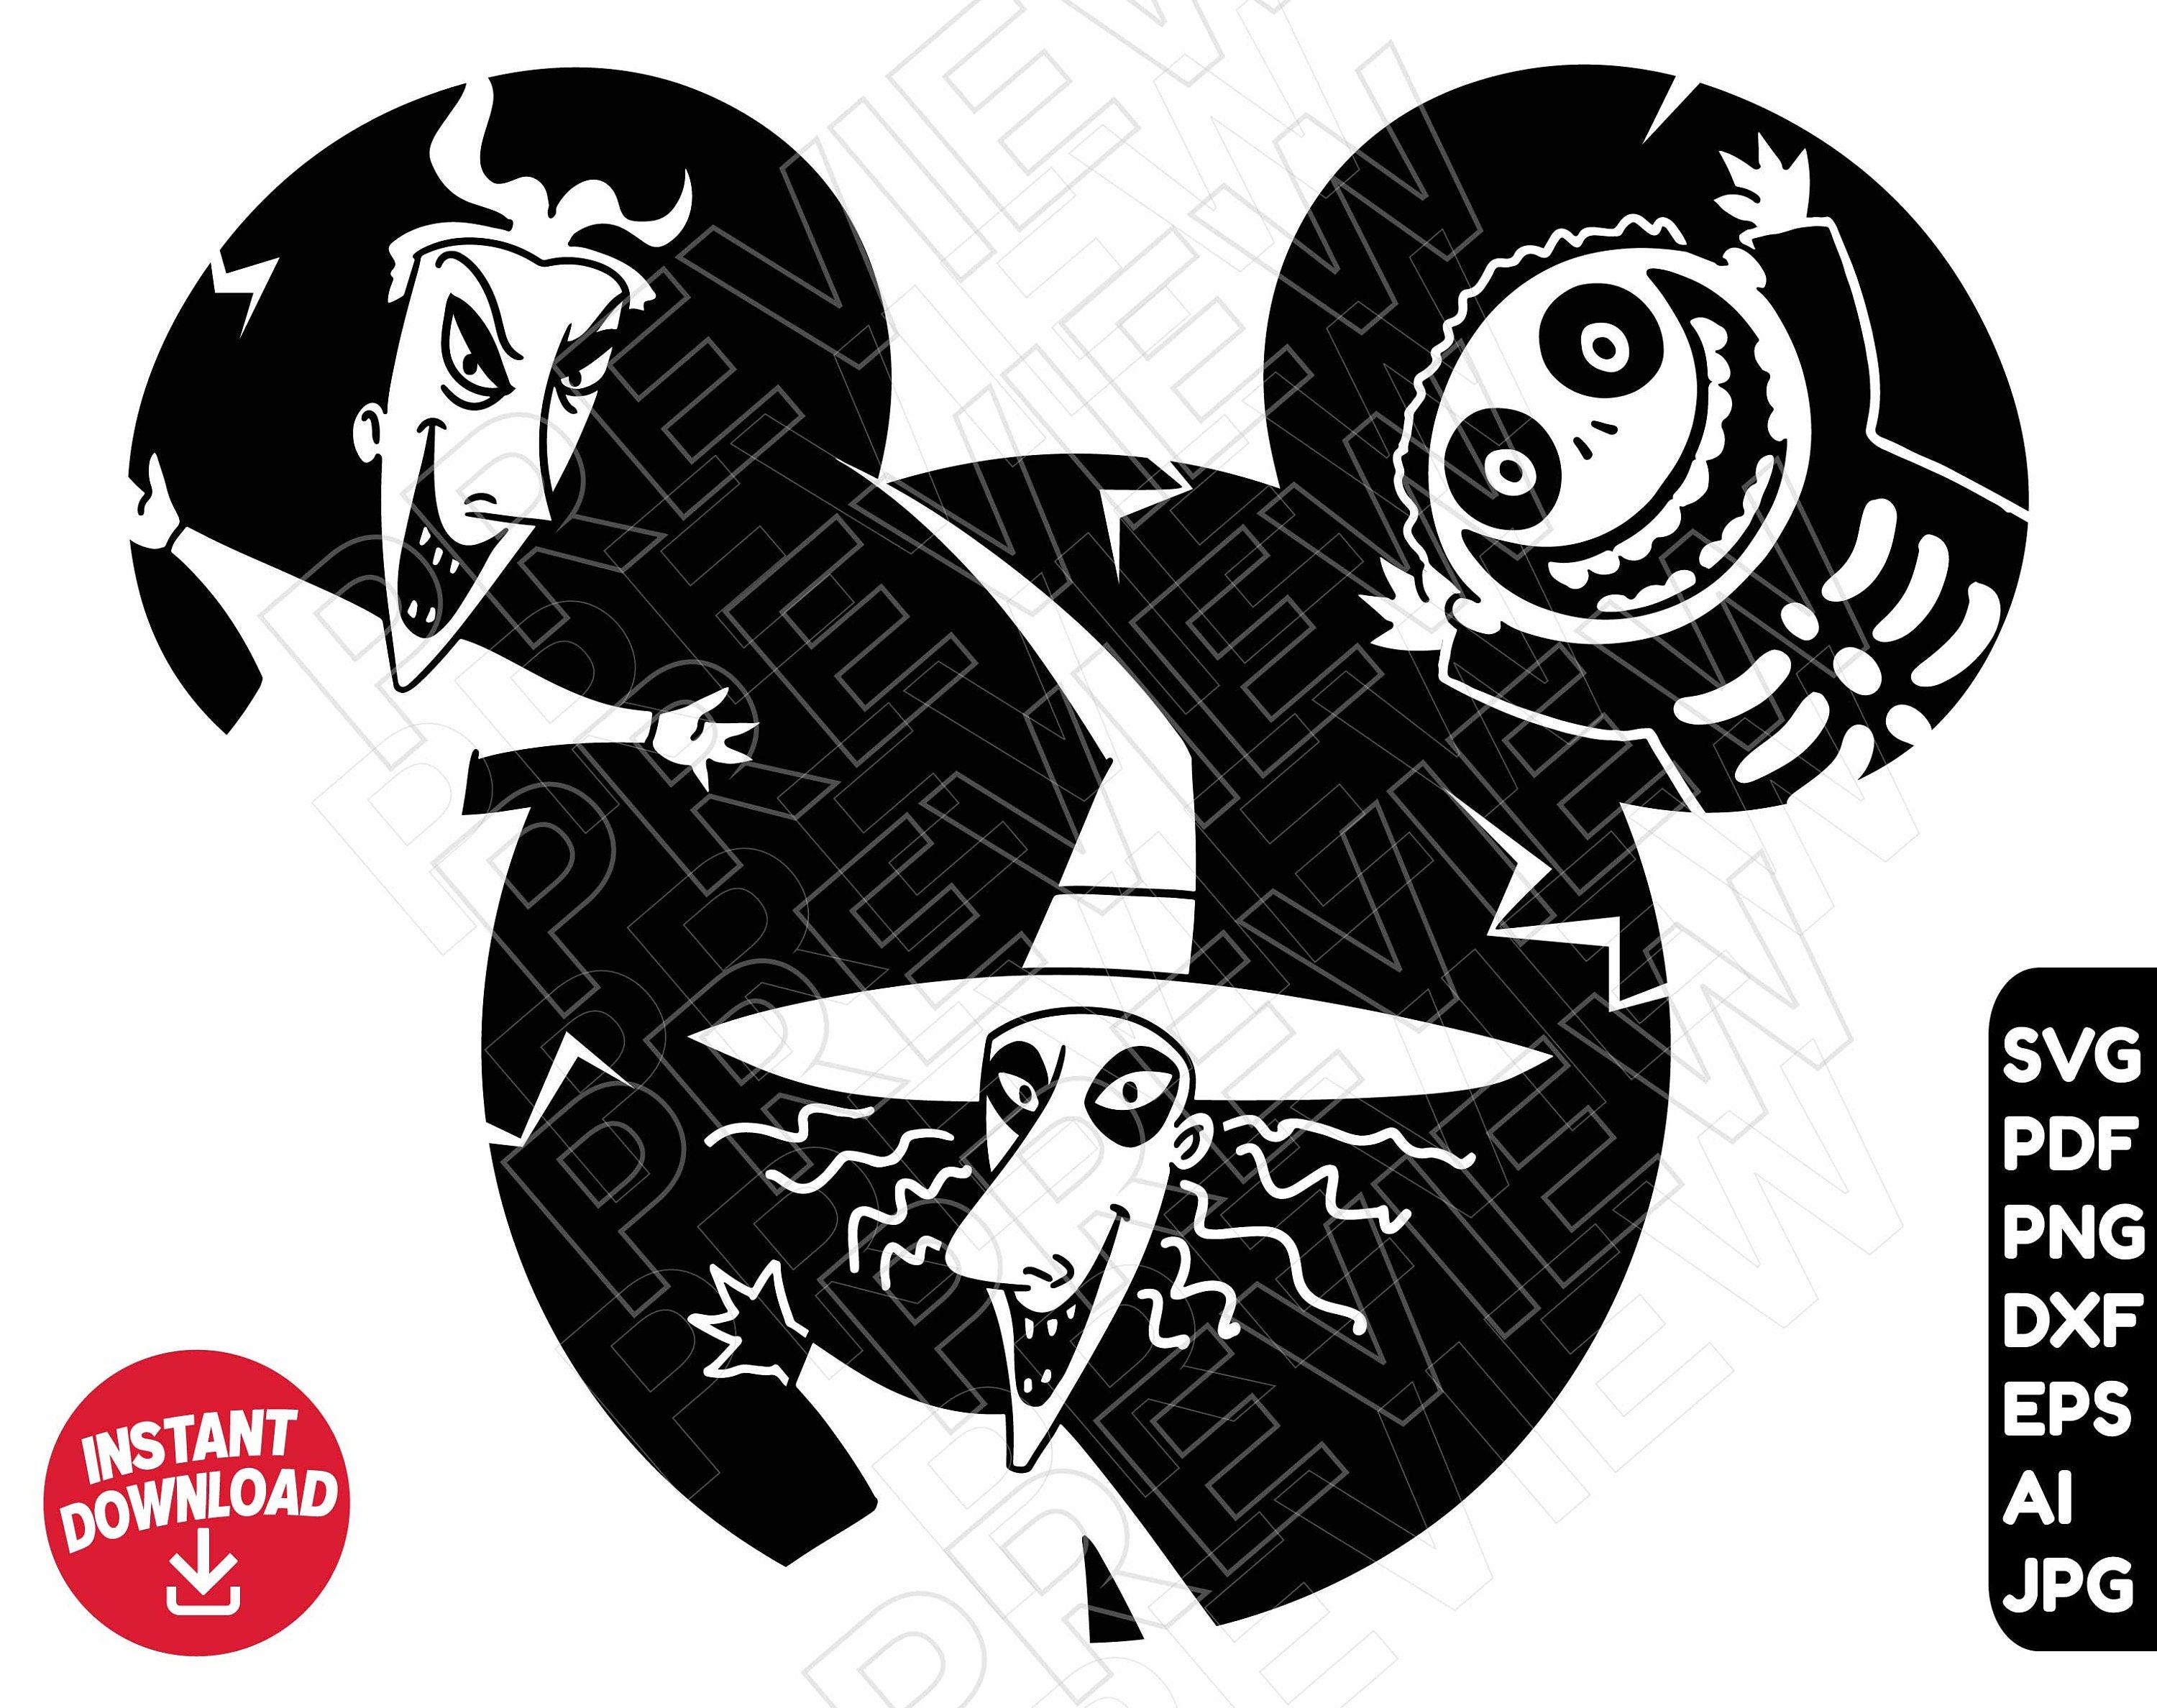 Lock Shock Barrel SVG The Nightmare Before Christmas png clipart dxf , cut file outline silhouette